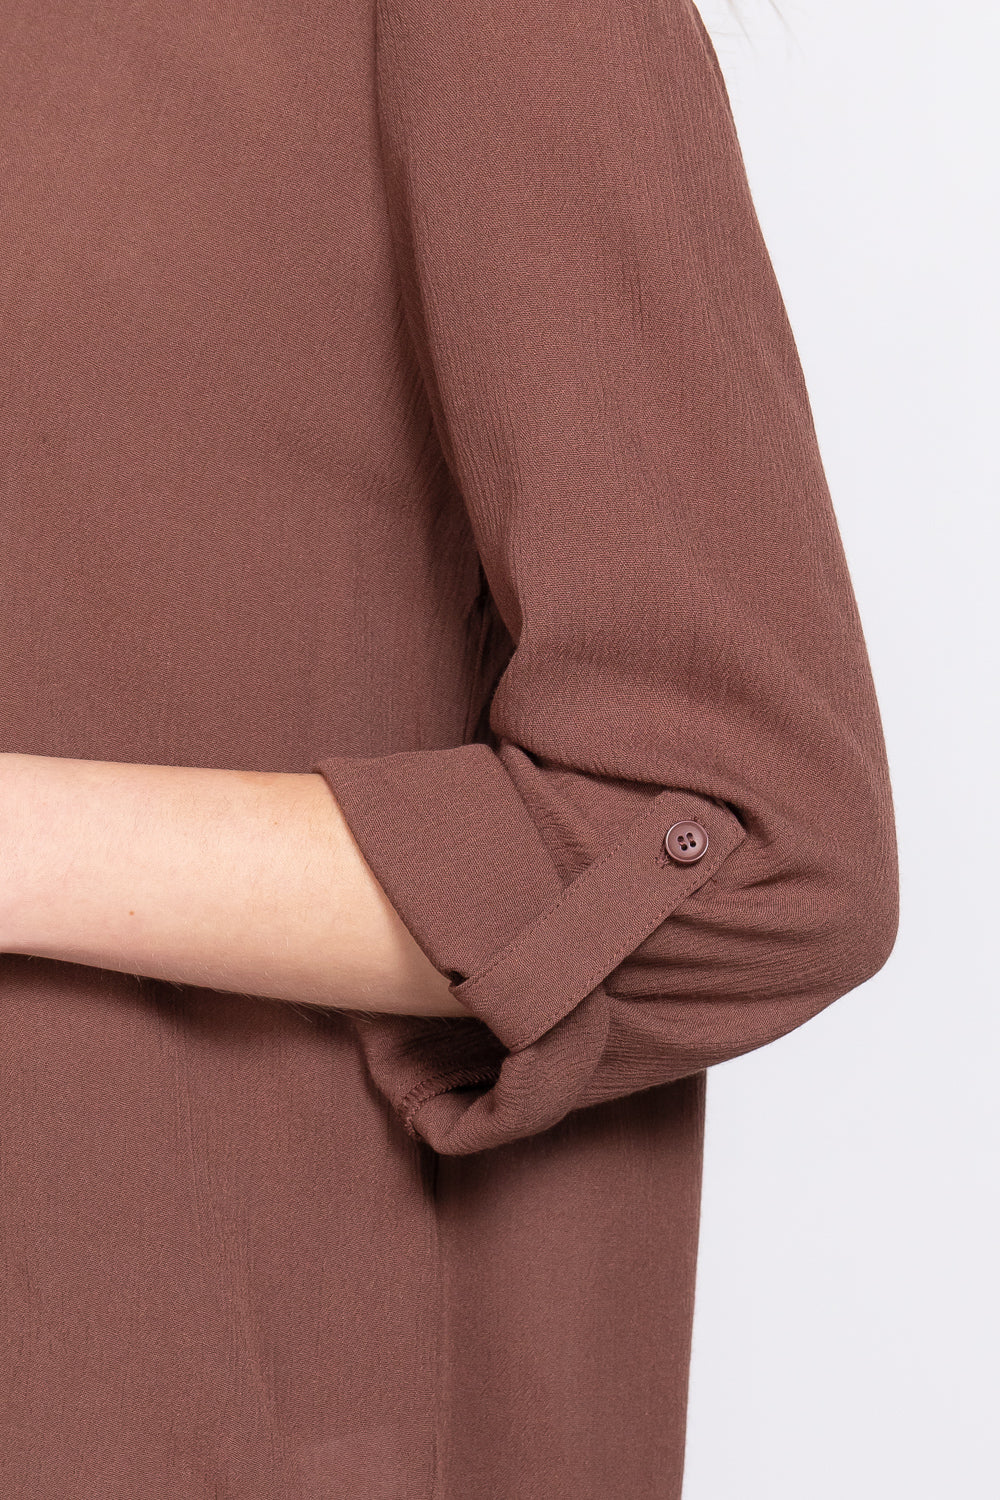 3/4 Roll Up Slv Pleated Blouse - Tigbul's Fashion